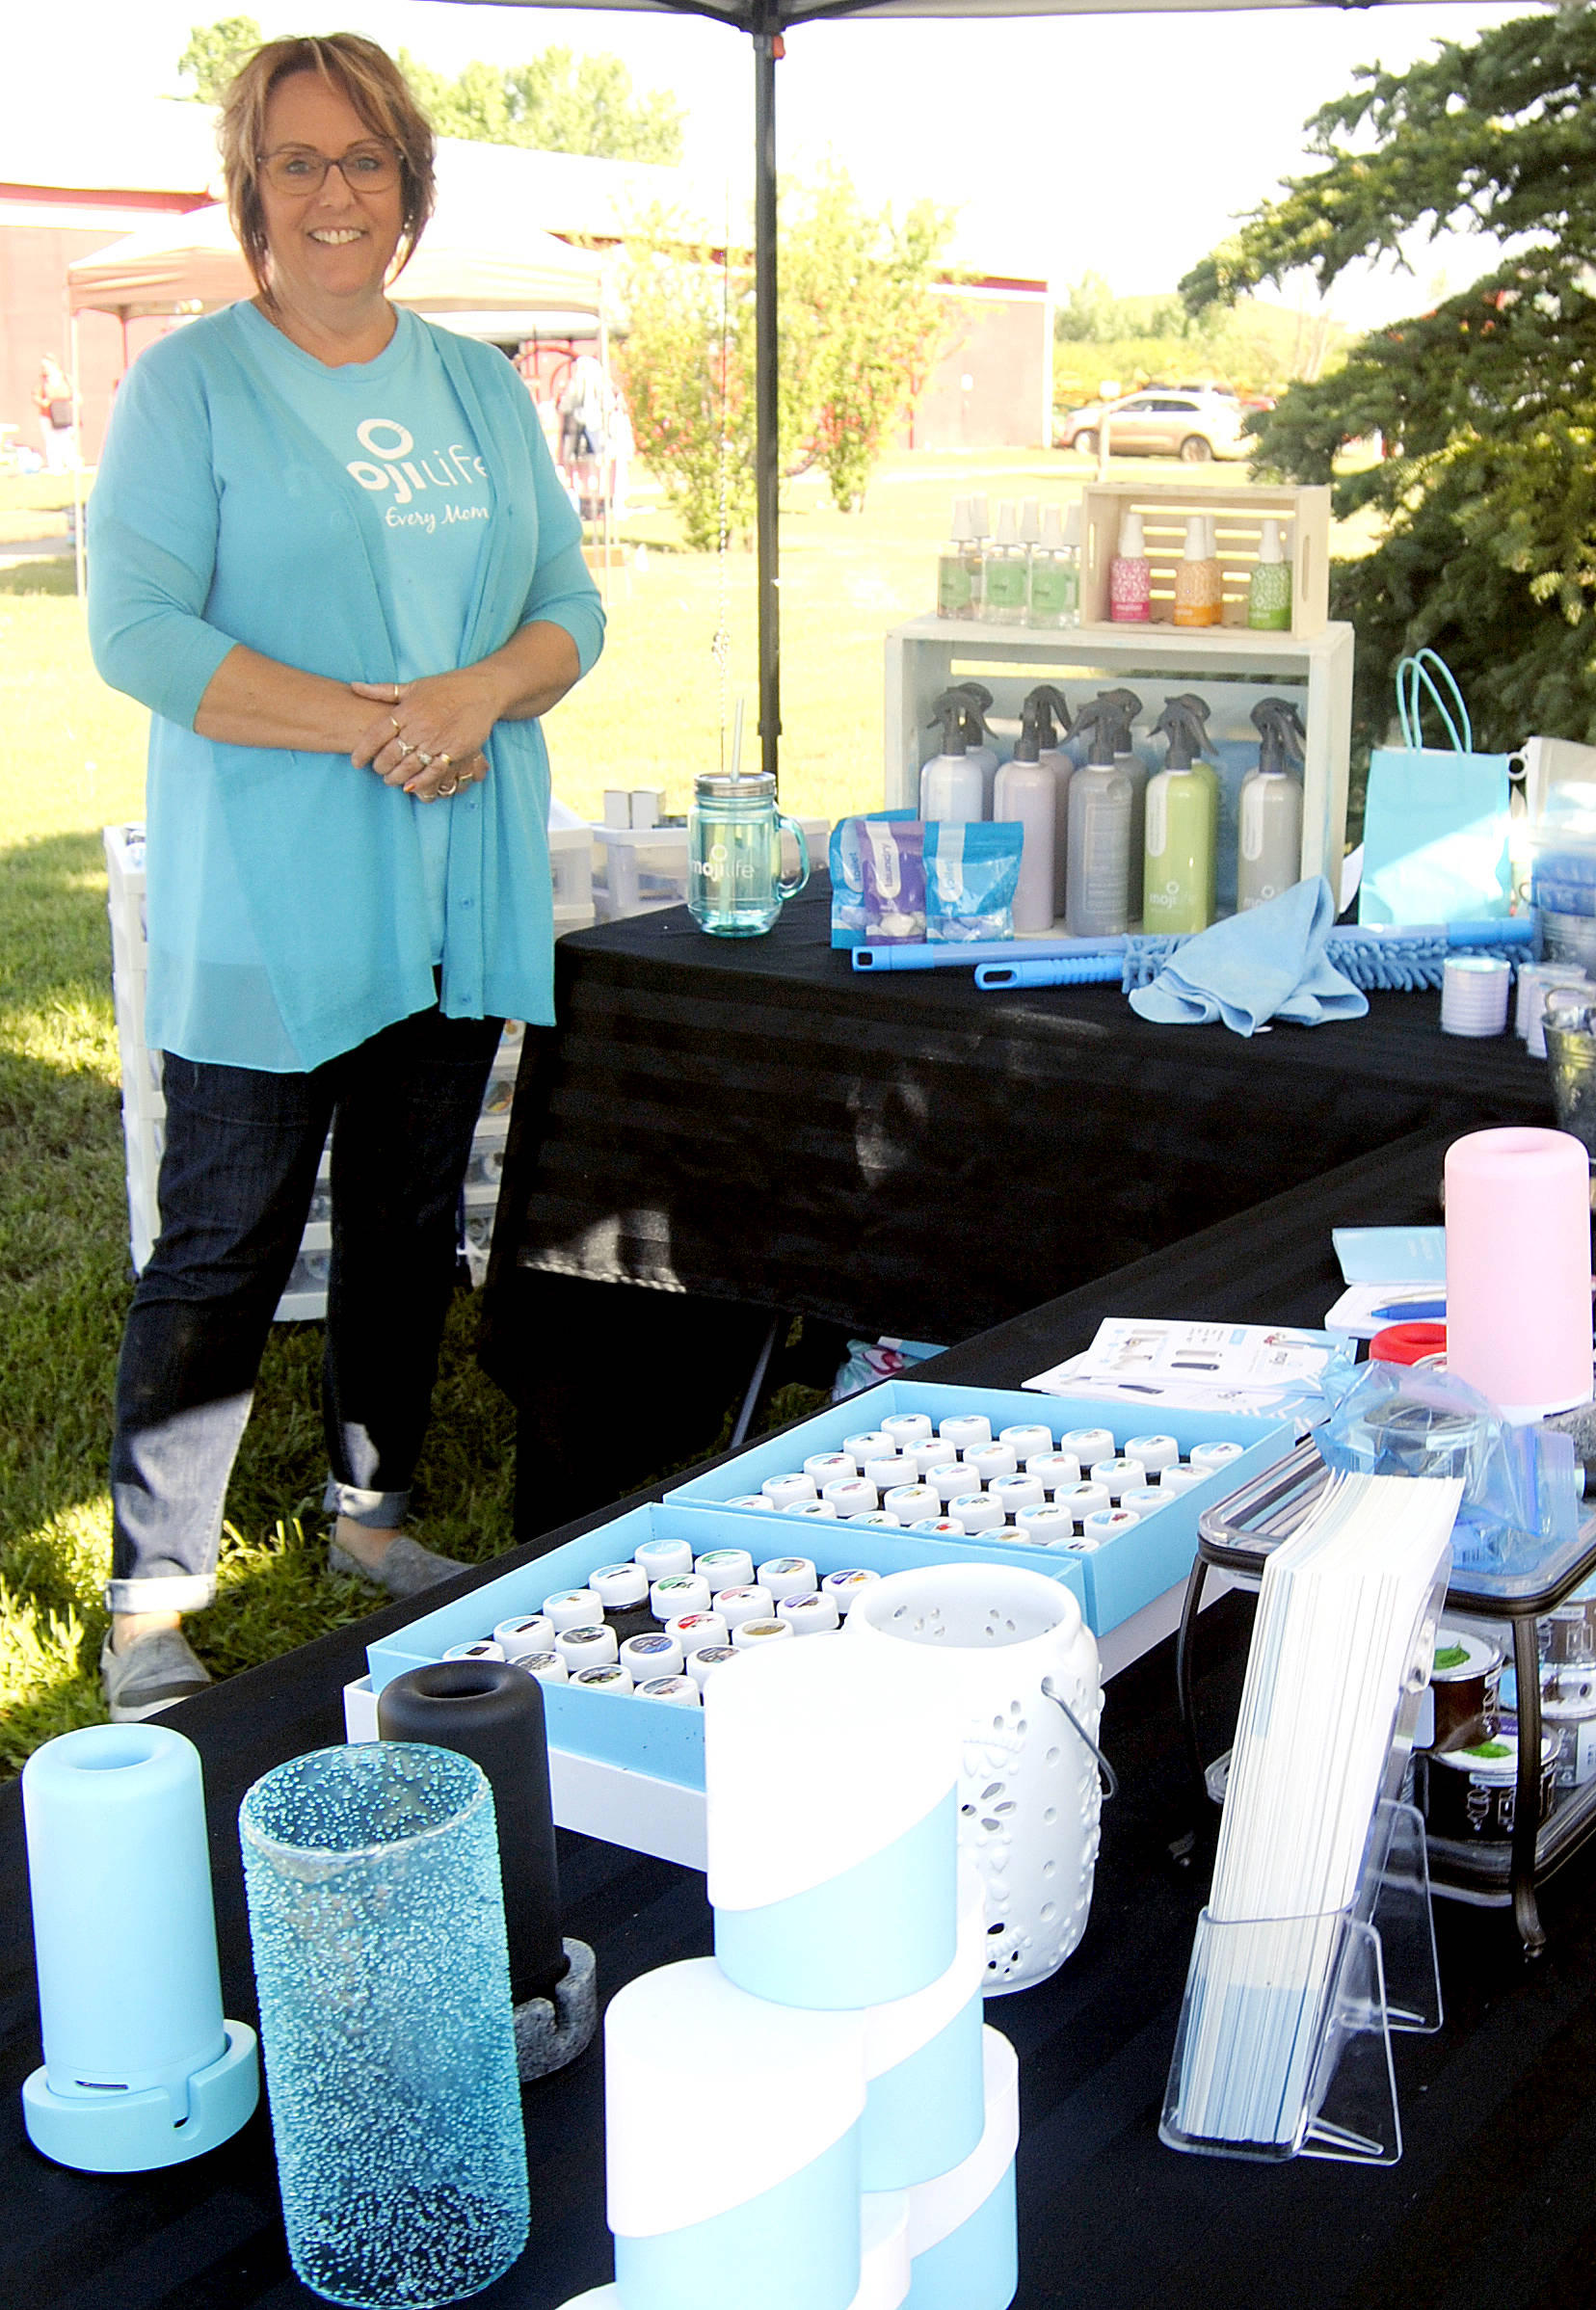 Kelly Armstrong from Erskine set up a table during Stettler’s Town and Country Museum market June 2. (Lisa Joy/Stettler Independent)